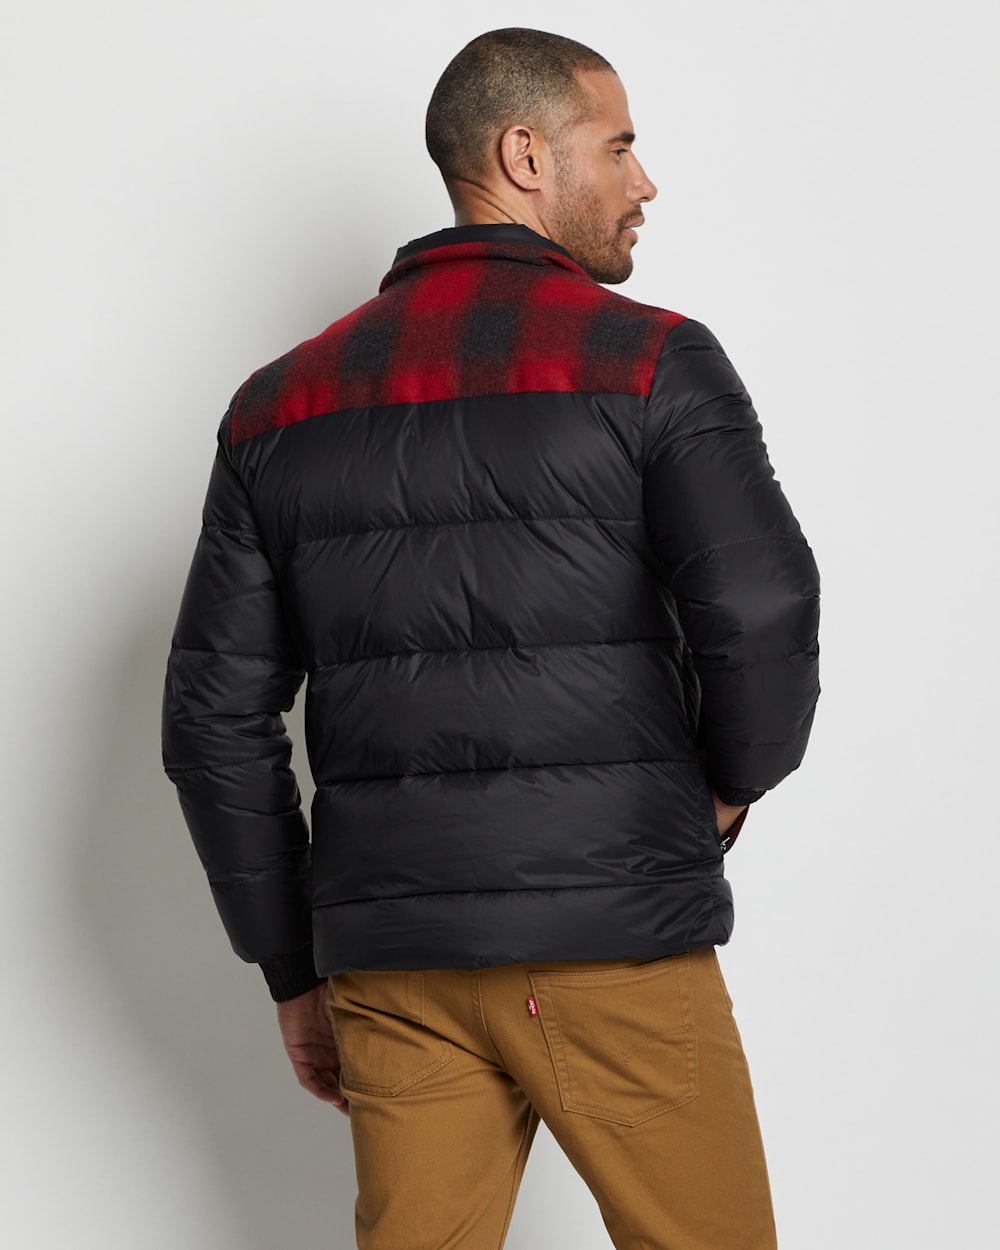 ALTERNATE VIEW OF MEN'S GRIZZLY PEAK PUFFER IN BLACK/RED OMBRE image number 6